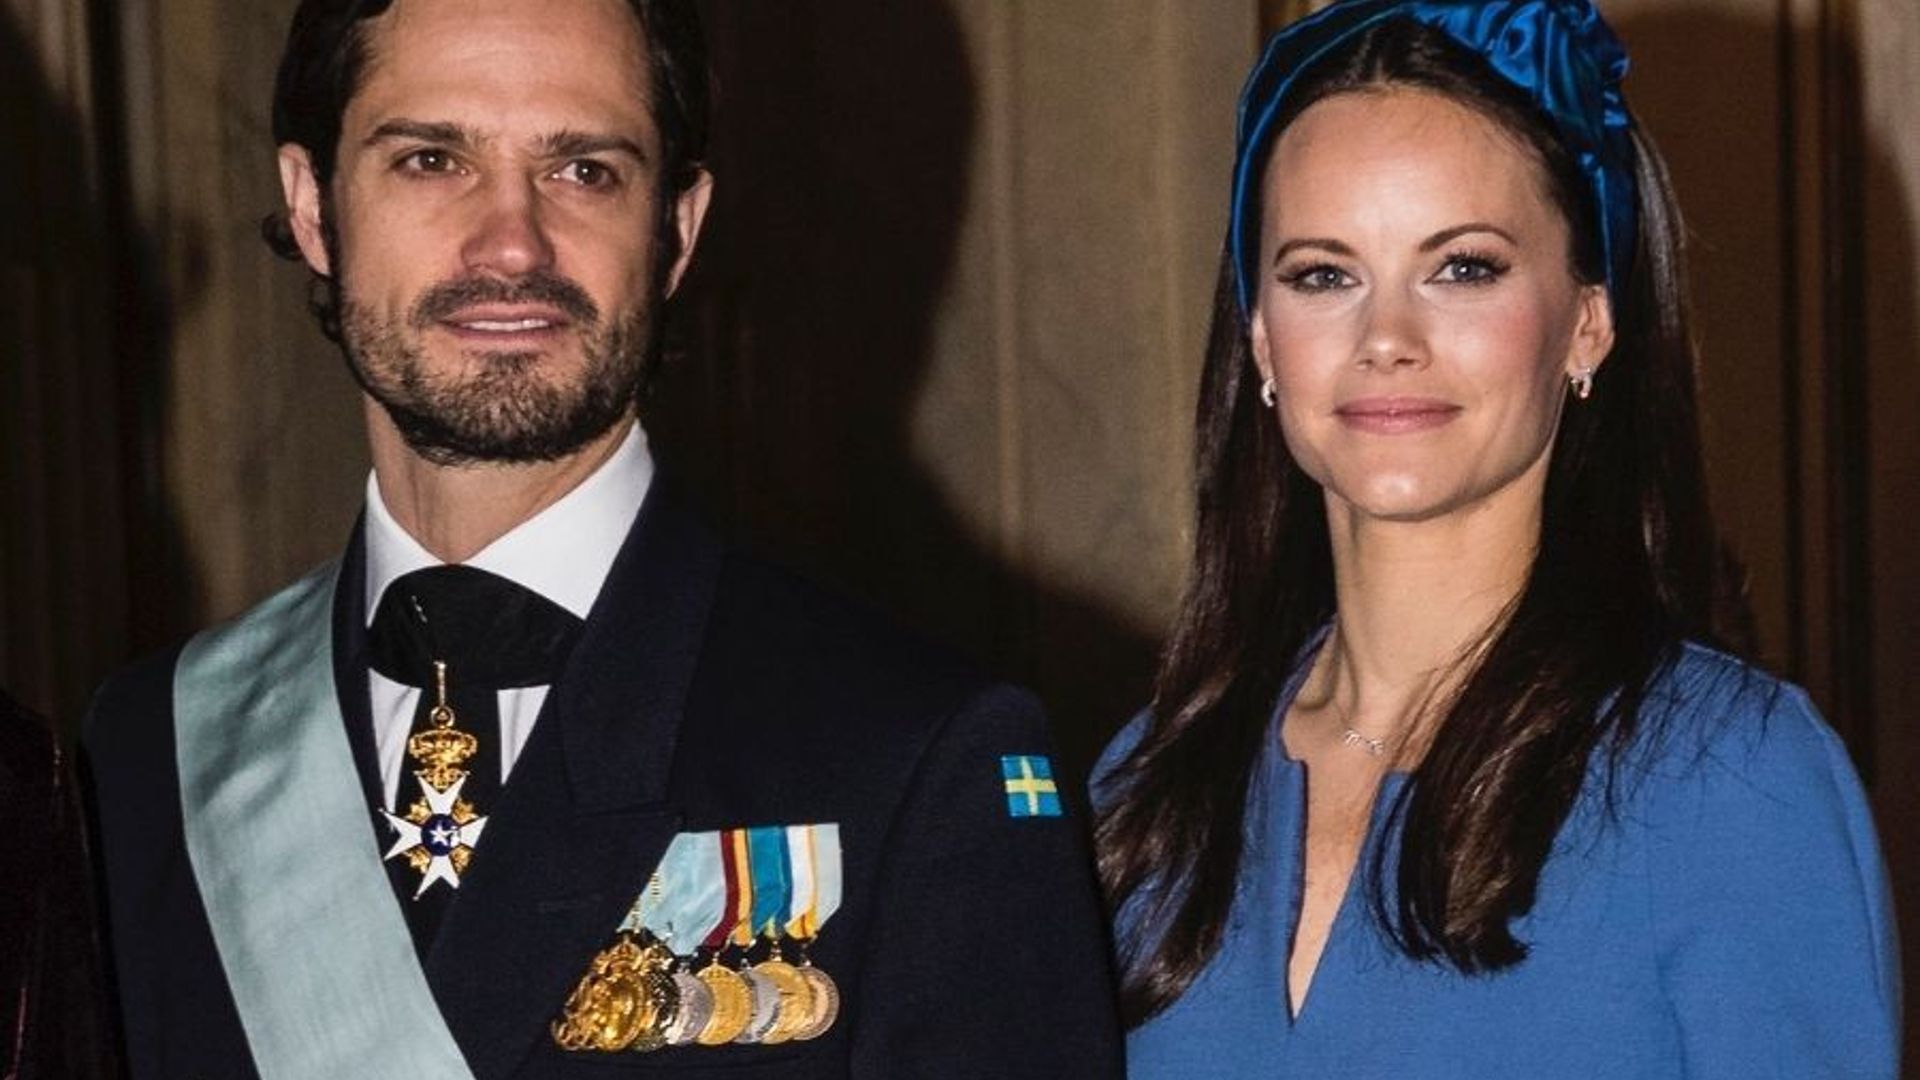 Prince Carl Philip and Princess Sofia release gorgeous family Christmas photo and video